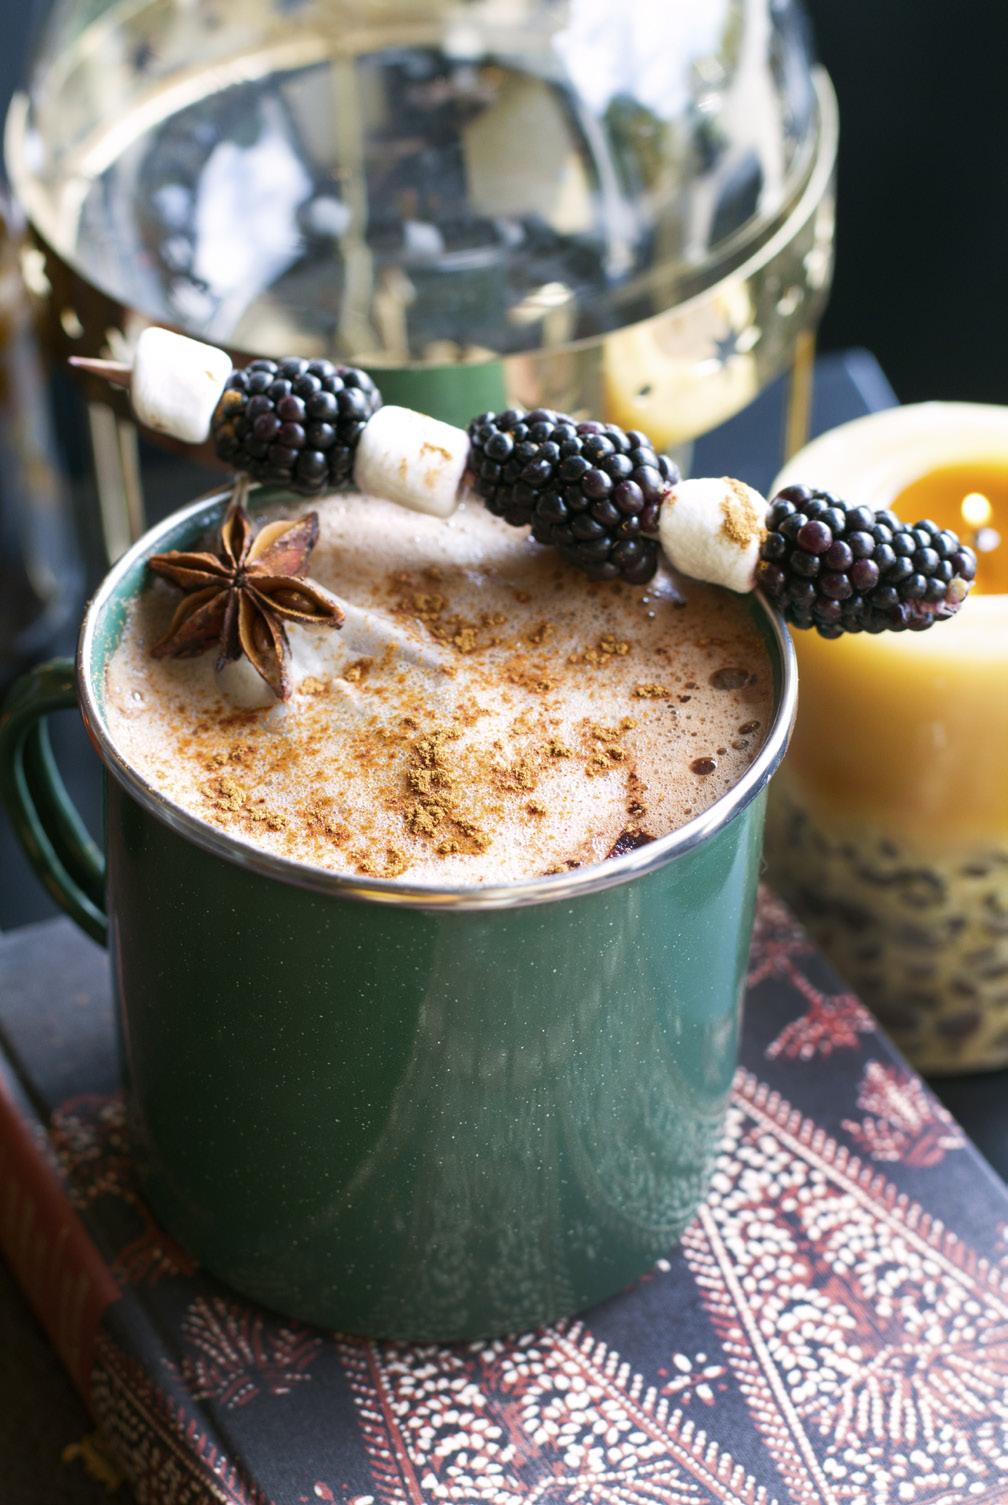 Spiced Blackberry Hot Chocolate Blackberries are so beautifully in season right now that I thought putting a fruity spin on a cozy hot chocolate would be fun! Yield: 1, 16 oz. Drink 14 oz.